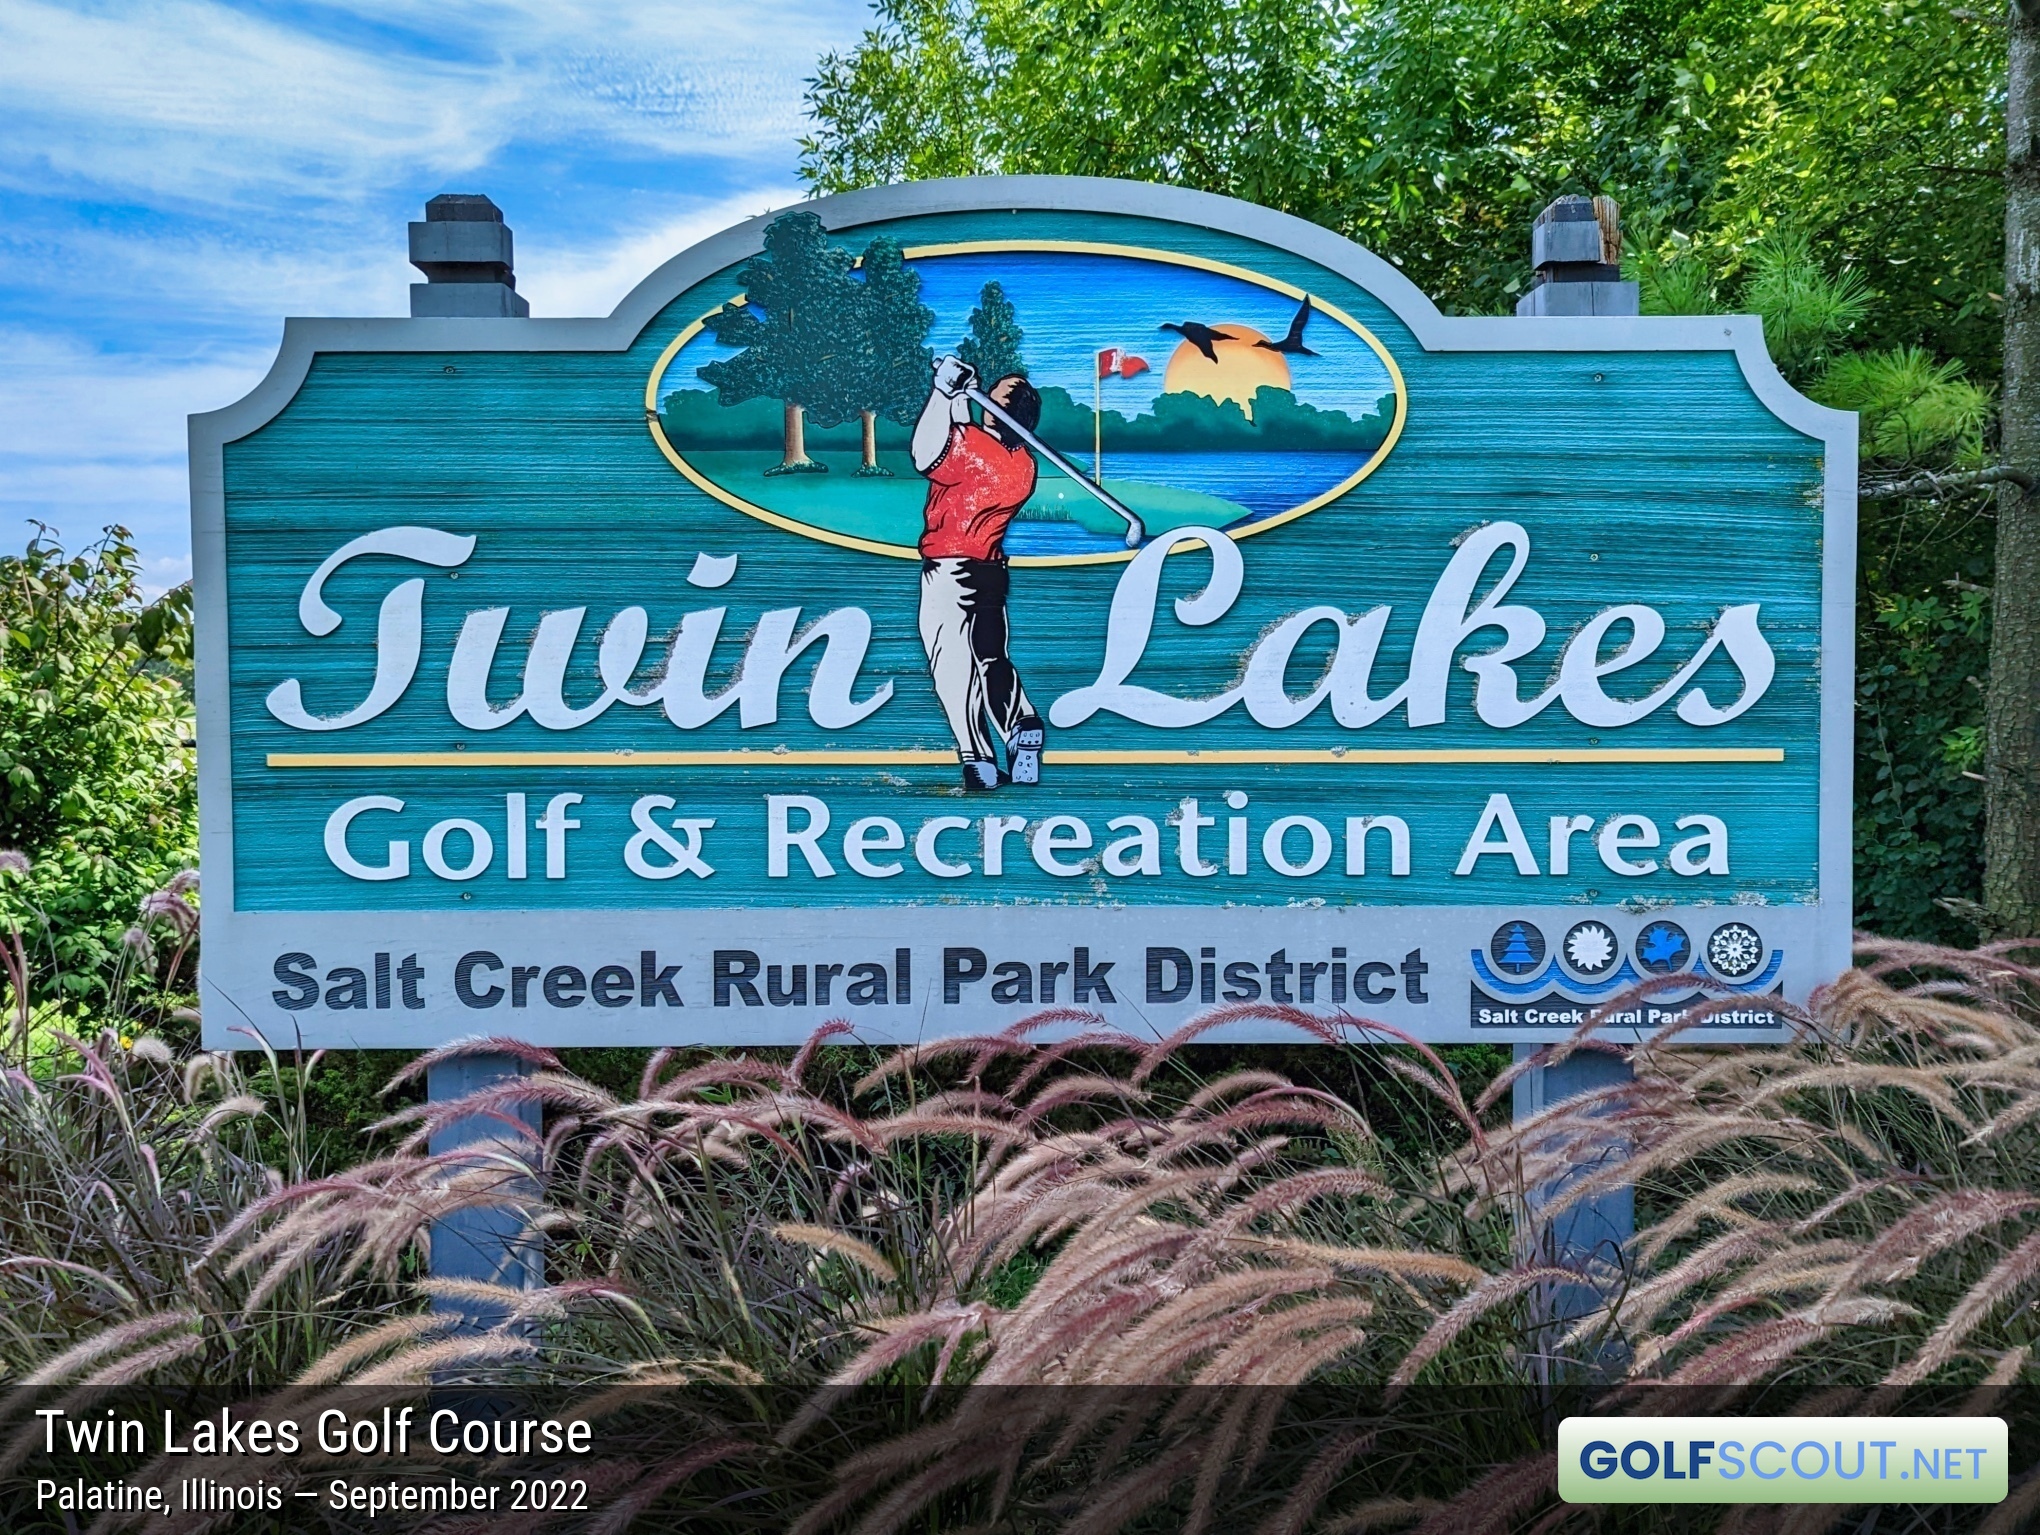 Sign at the entrance to Twin Lakes Golf Course